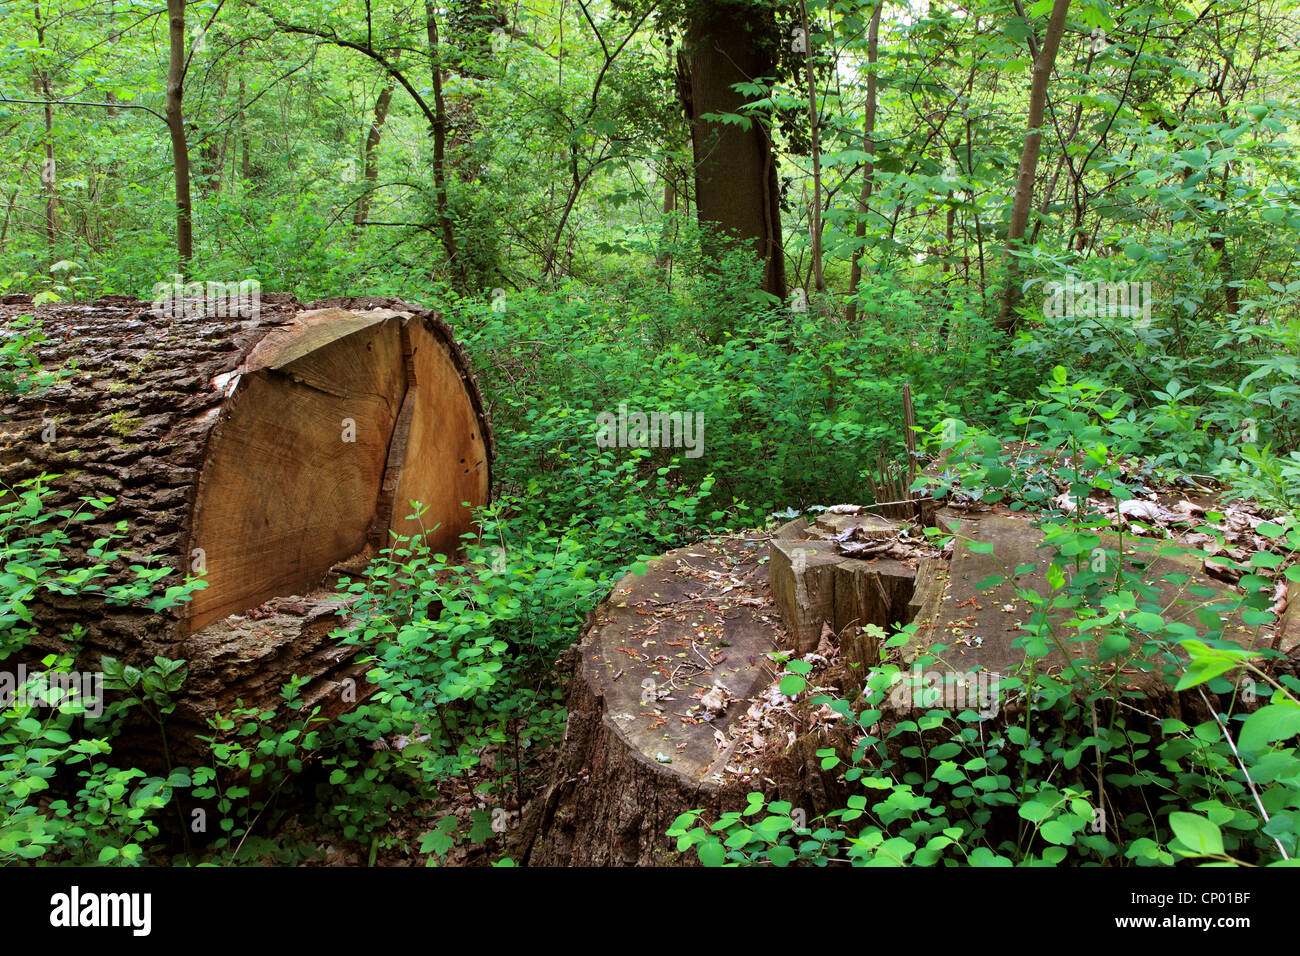 log in floodplain forest in spring, Germany Stock Photo